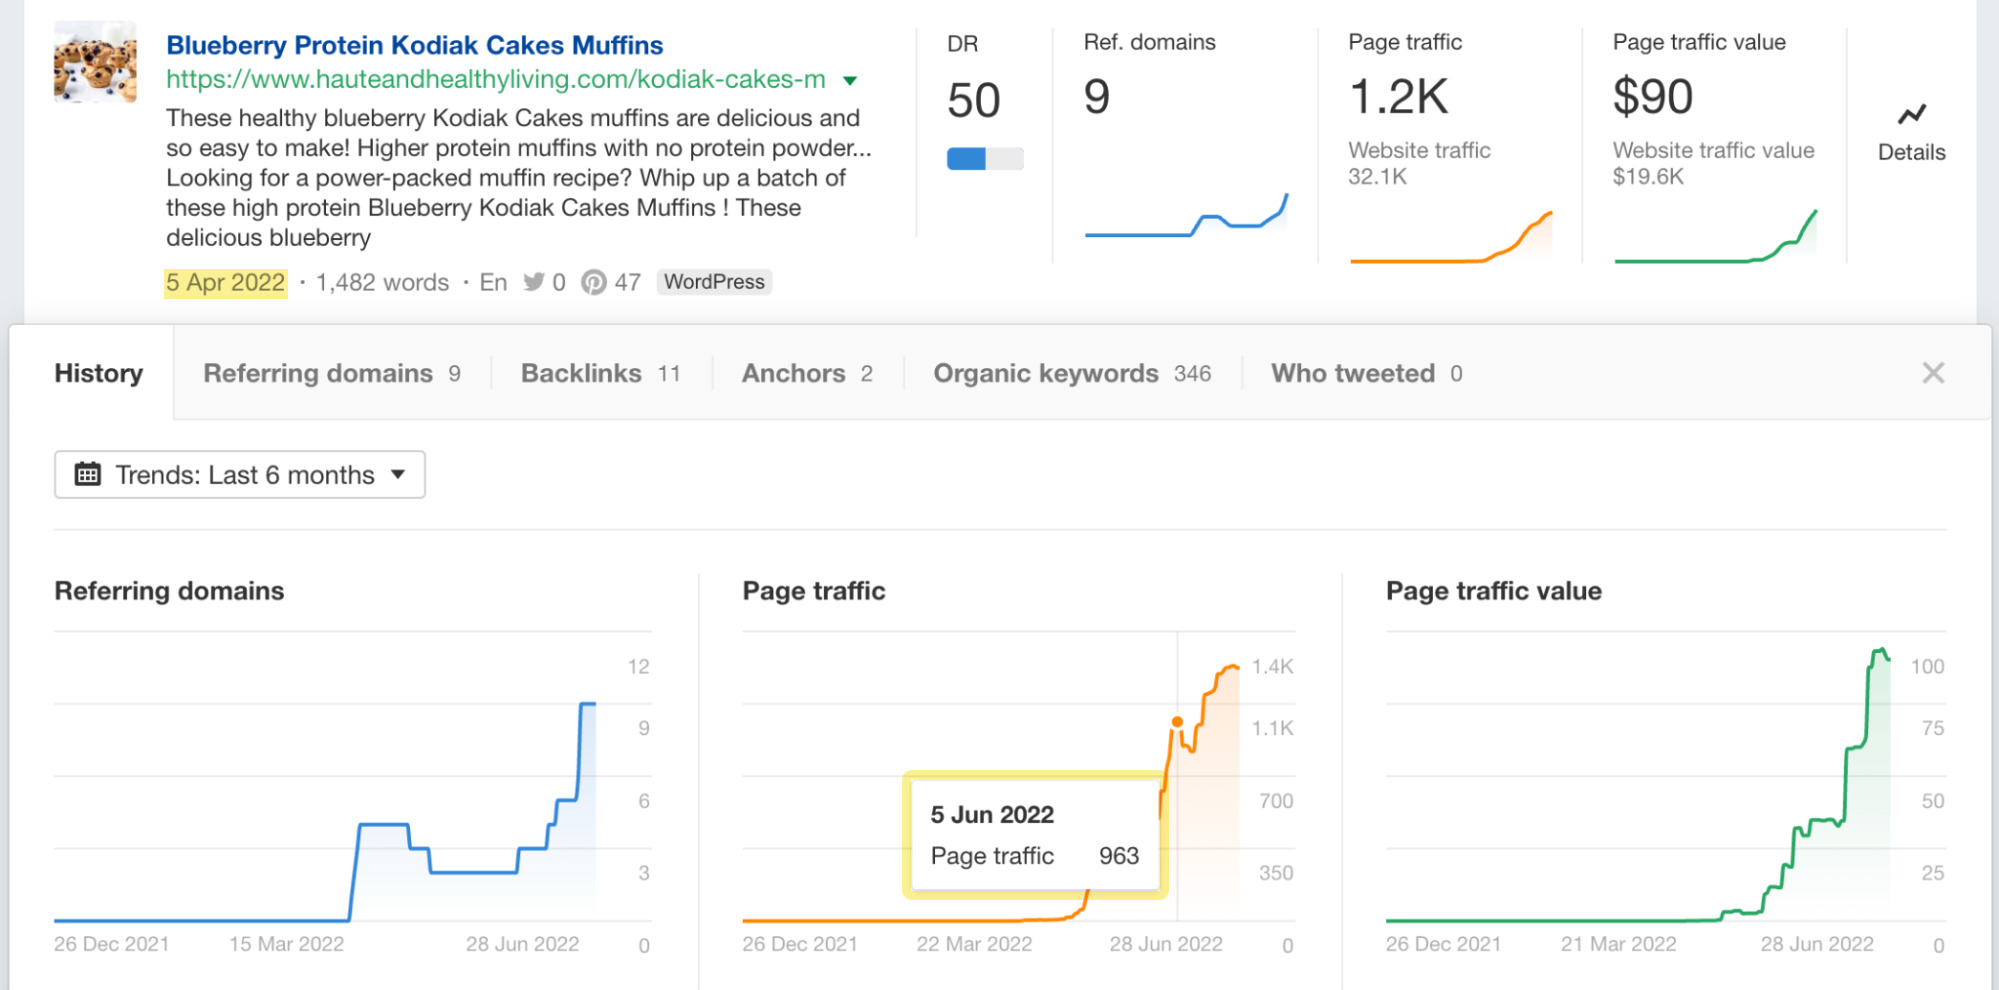 Traffic to the recently published page over time
